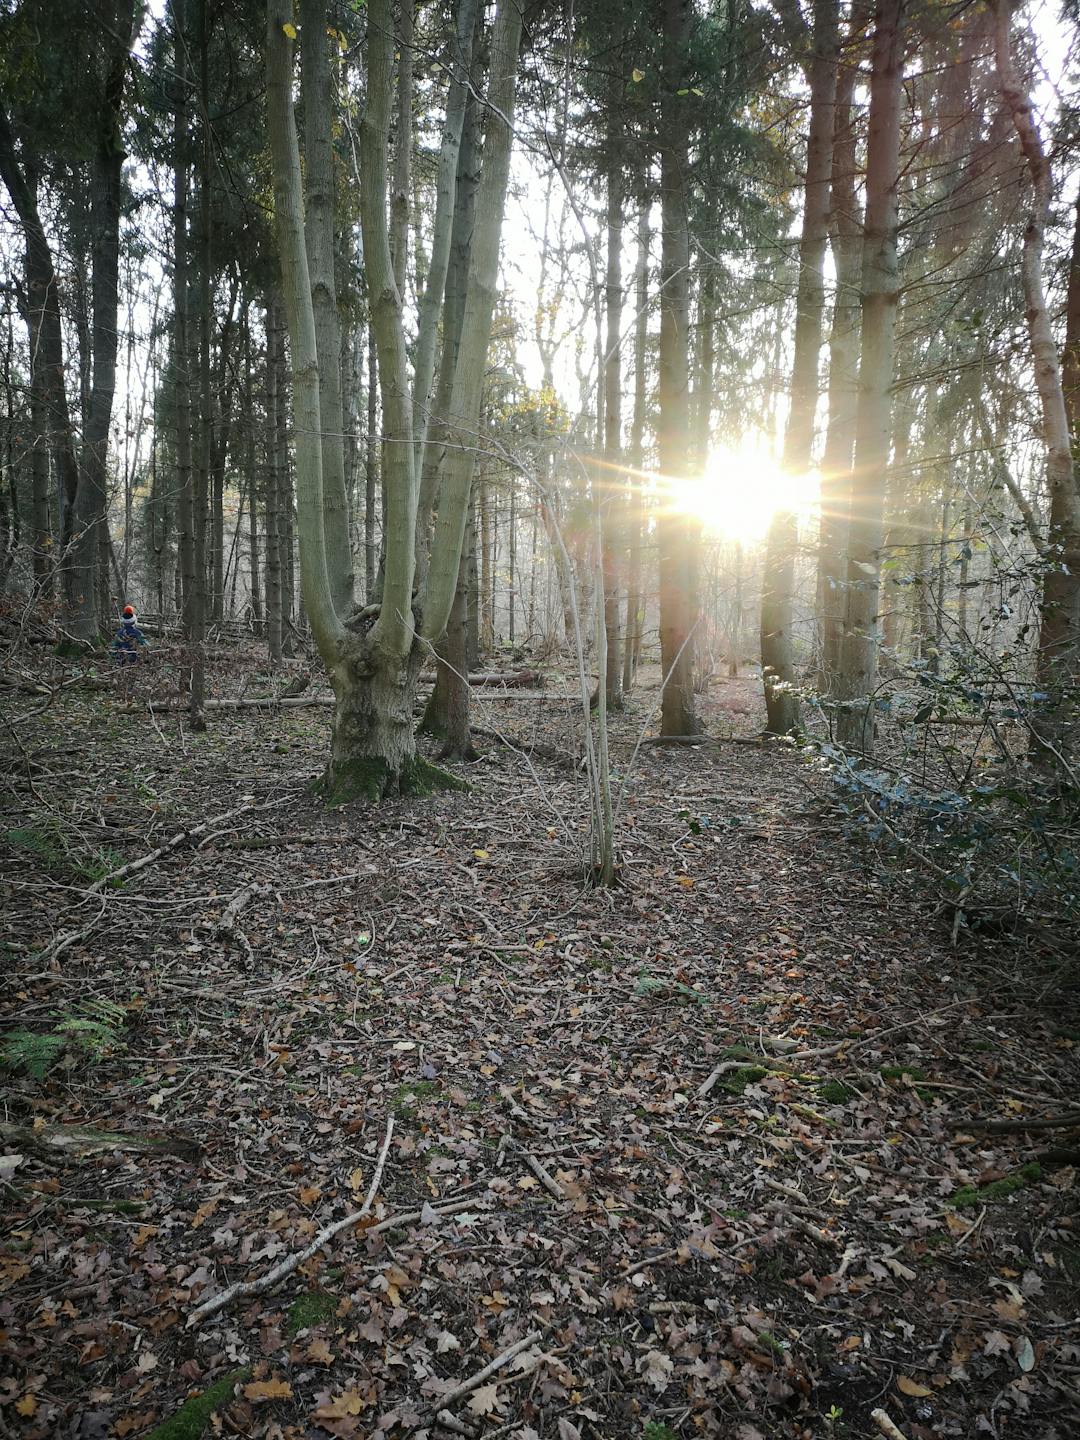 Stapleford Woods, Lincolnshire - image 1